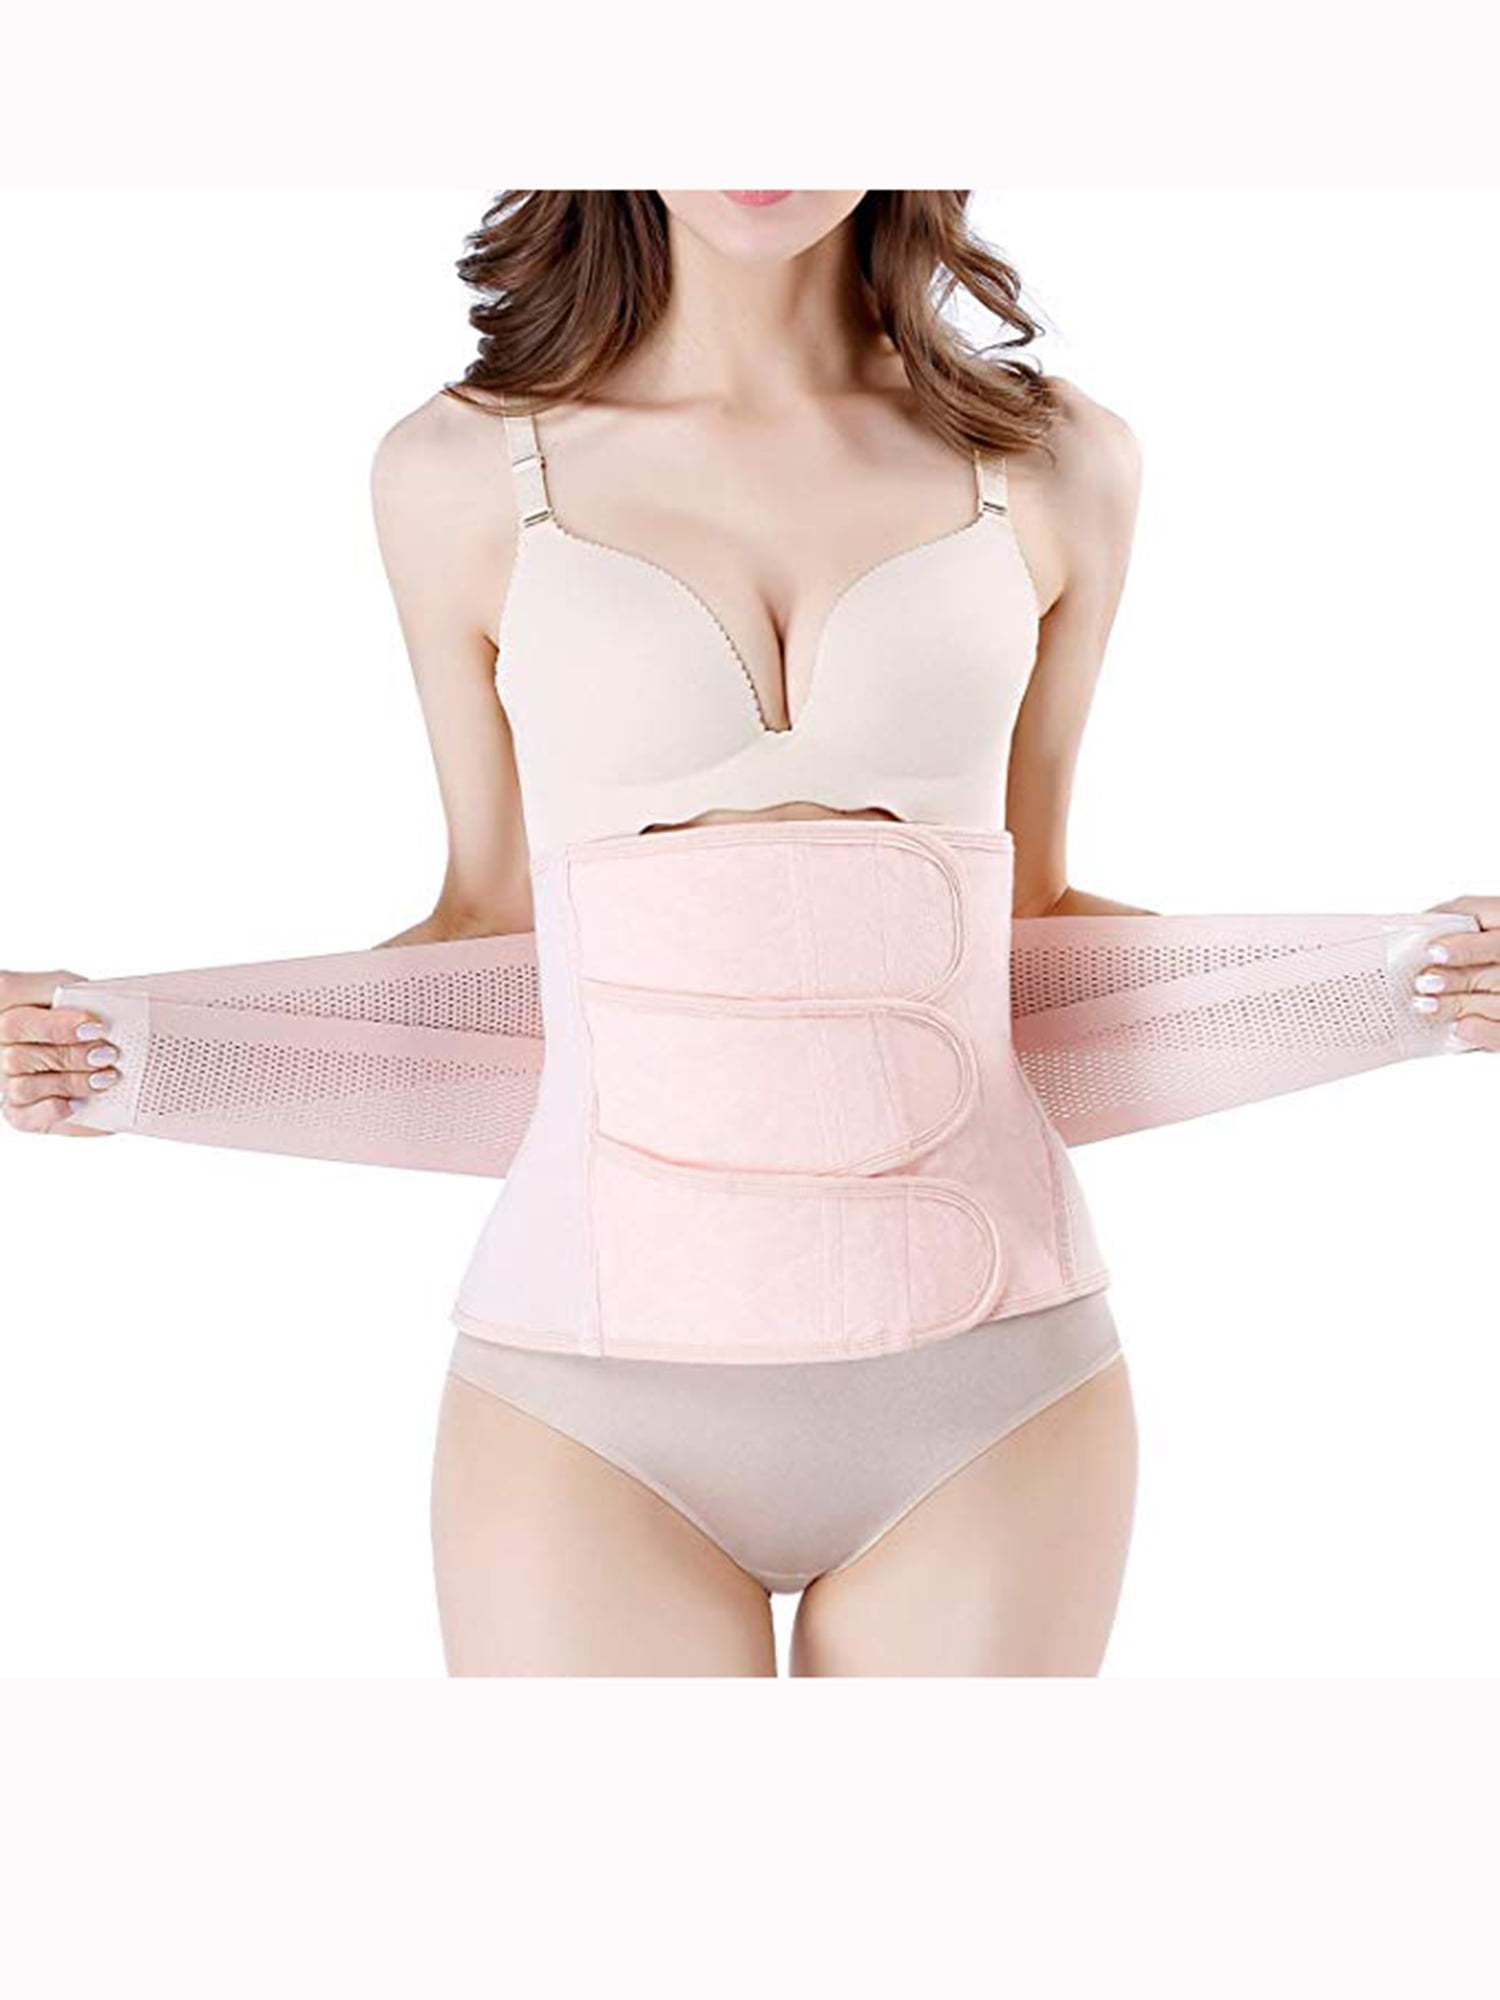 Size S Exceart Women Belly Reocvery Wrap Abdominal Support Girdle Belt Waist Slimming Belt Postpartum After Pregnancy Belly Band for Women